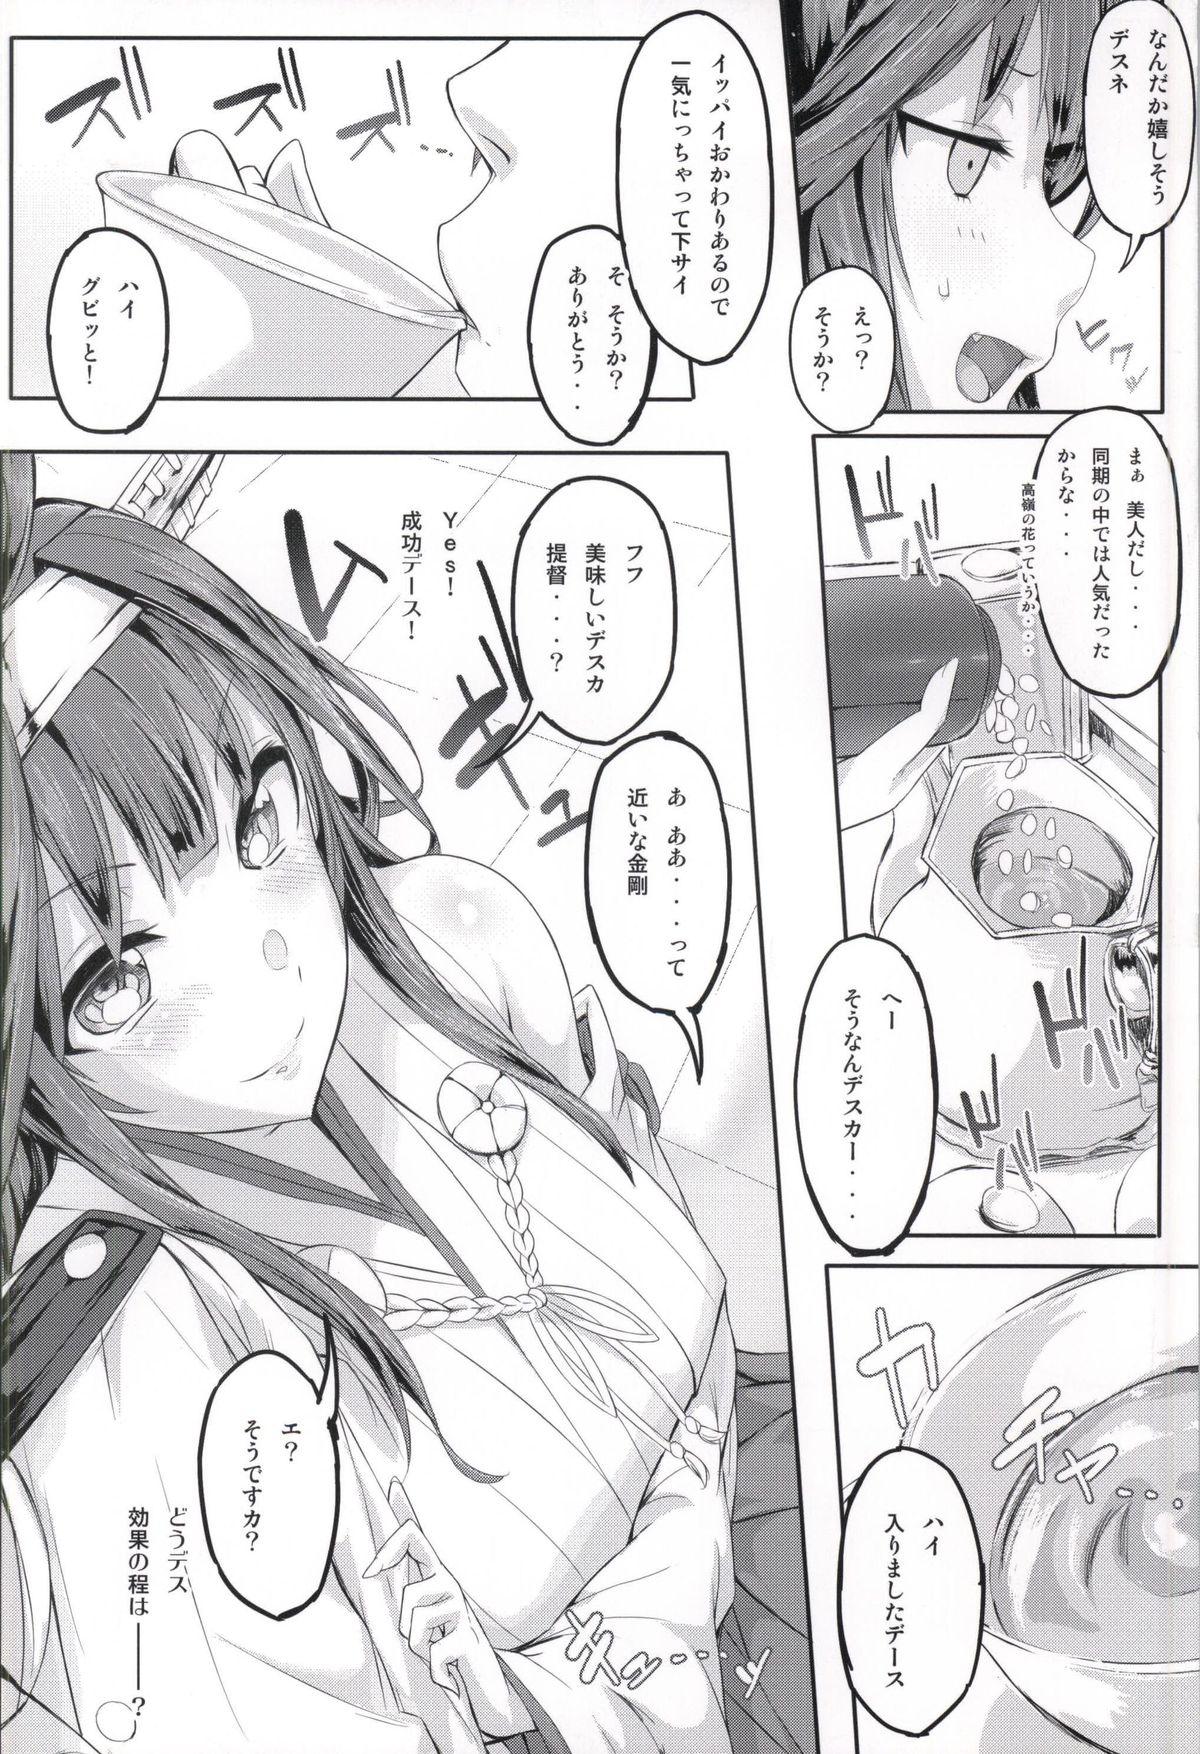 Nurugel Fleet Girls Pack Vol. 2 - Kantai collection Tight Cunt - Page 5